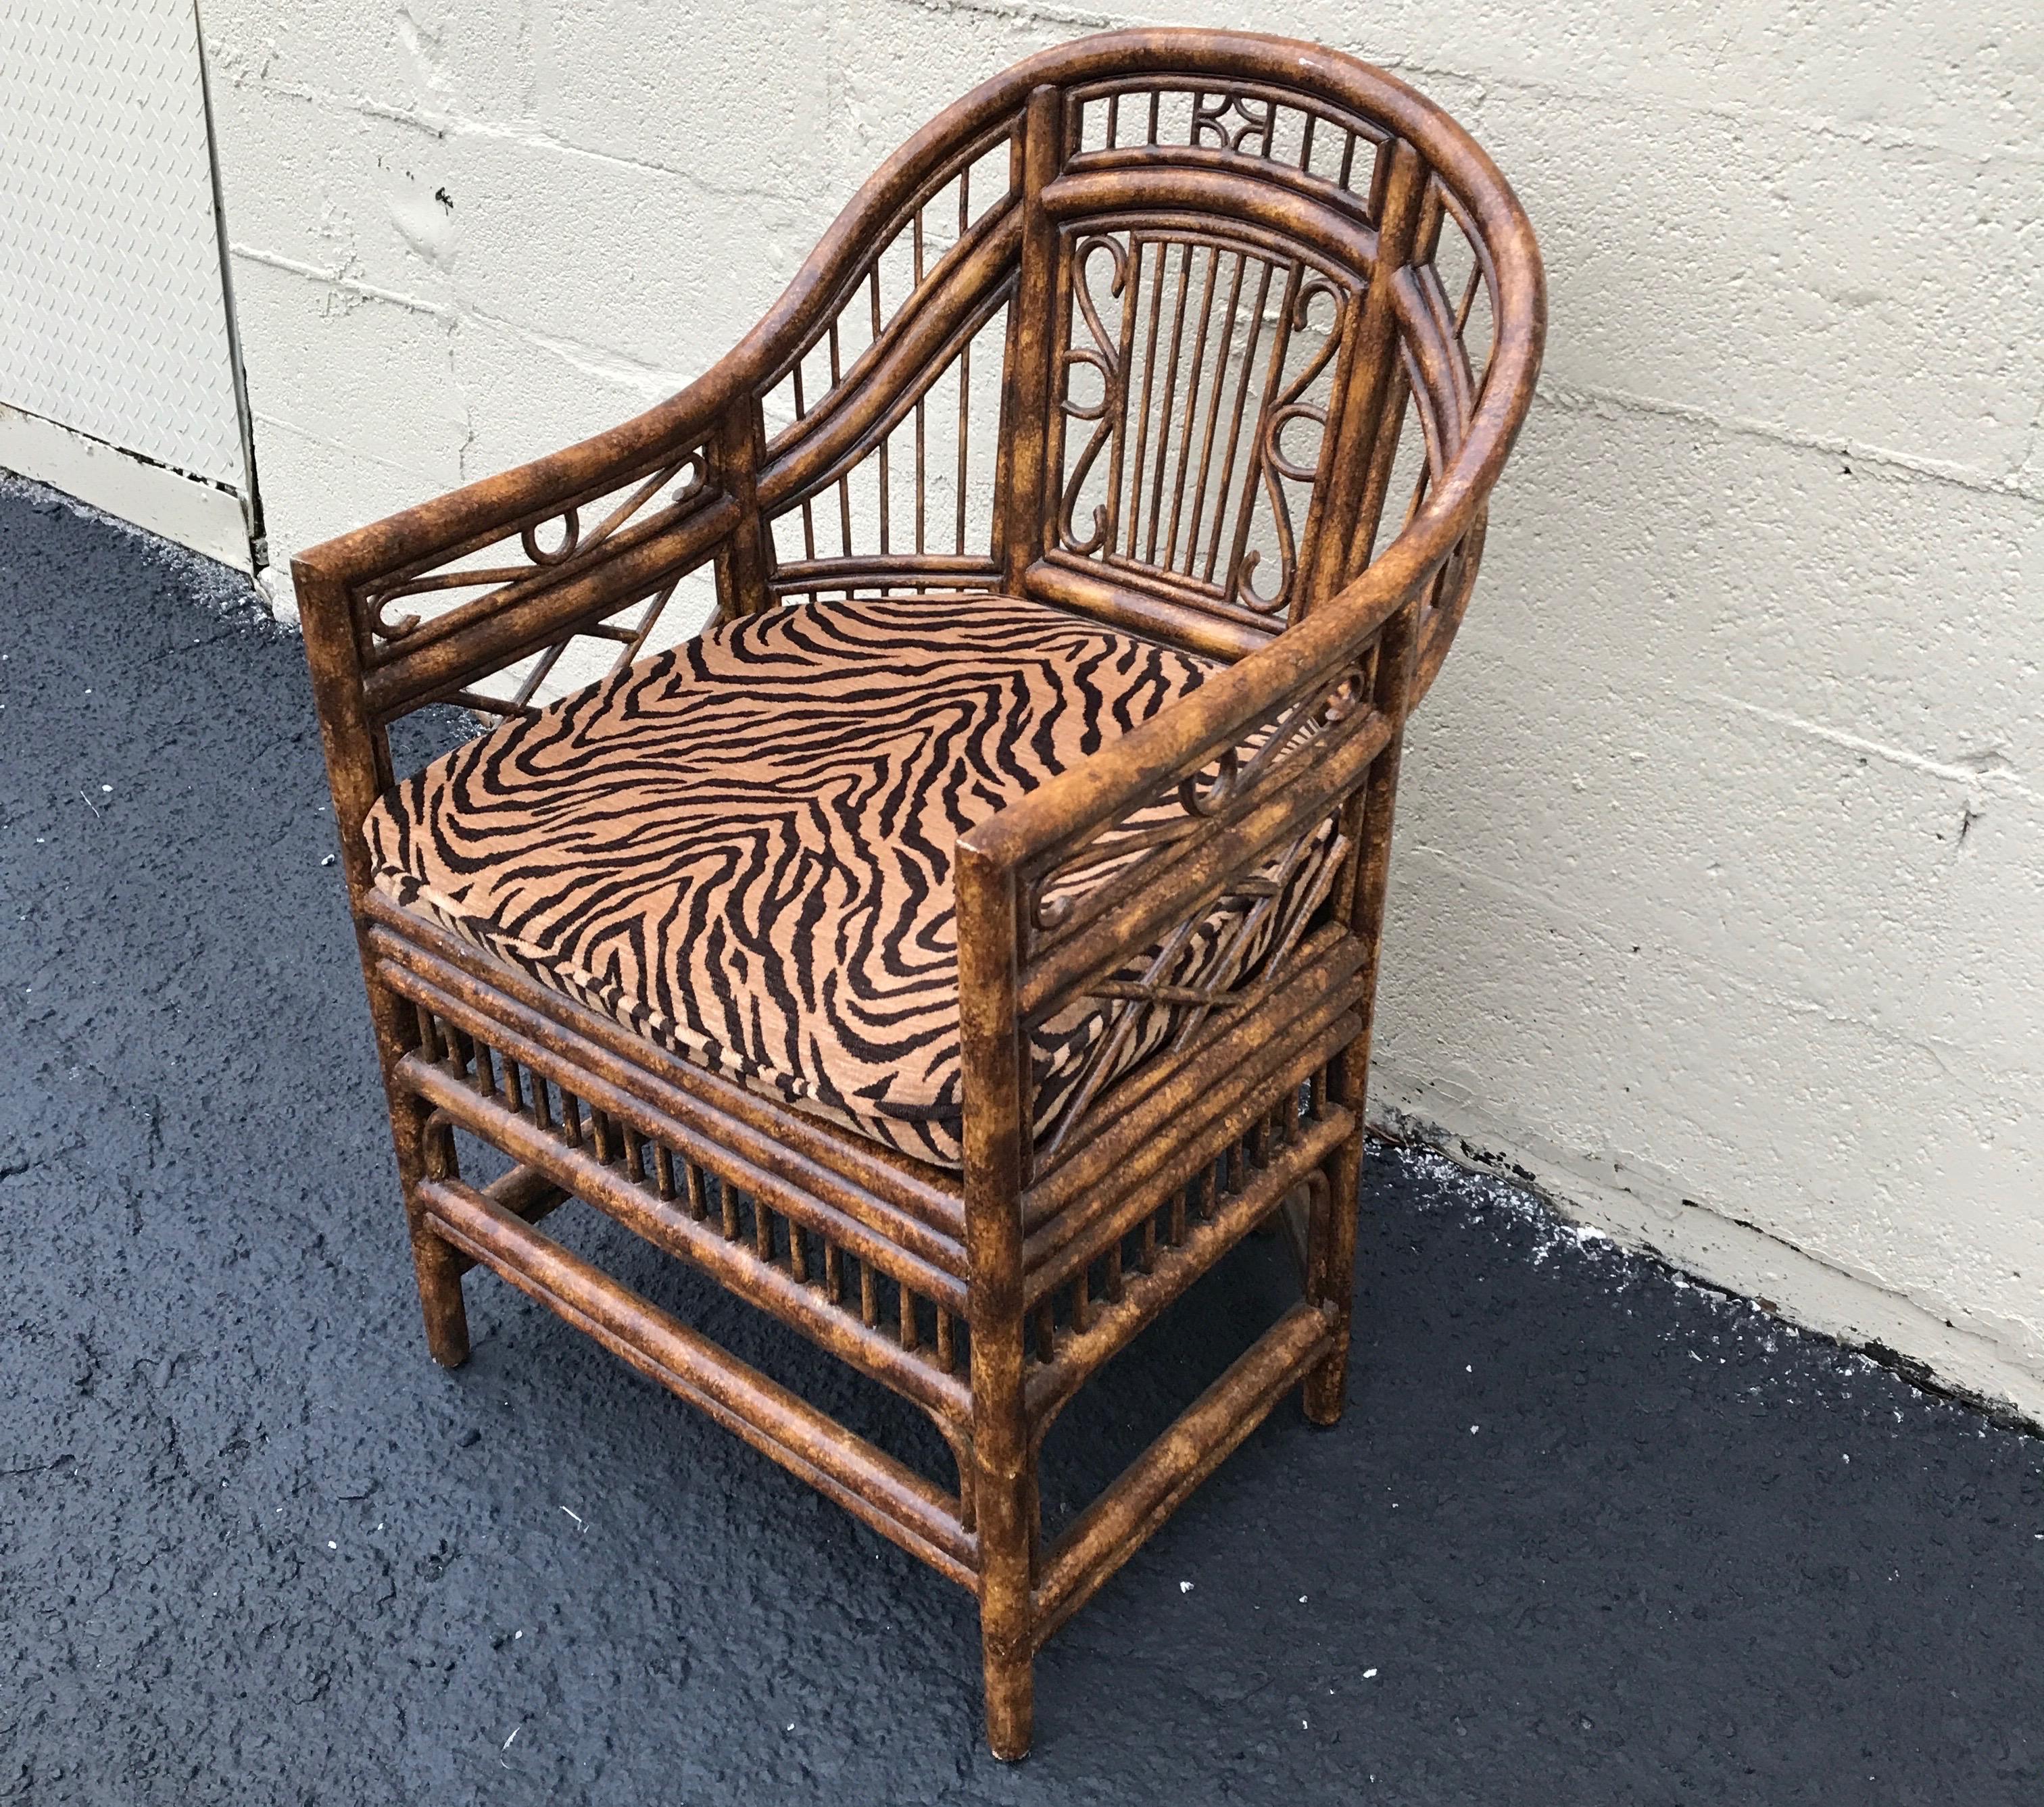 Single burnt bamboo Brighton chair with cane seat and tiger print cushion.